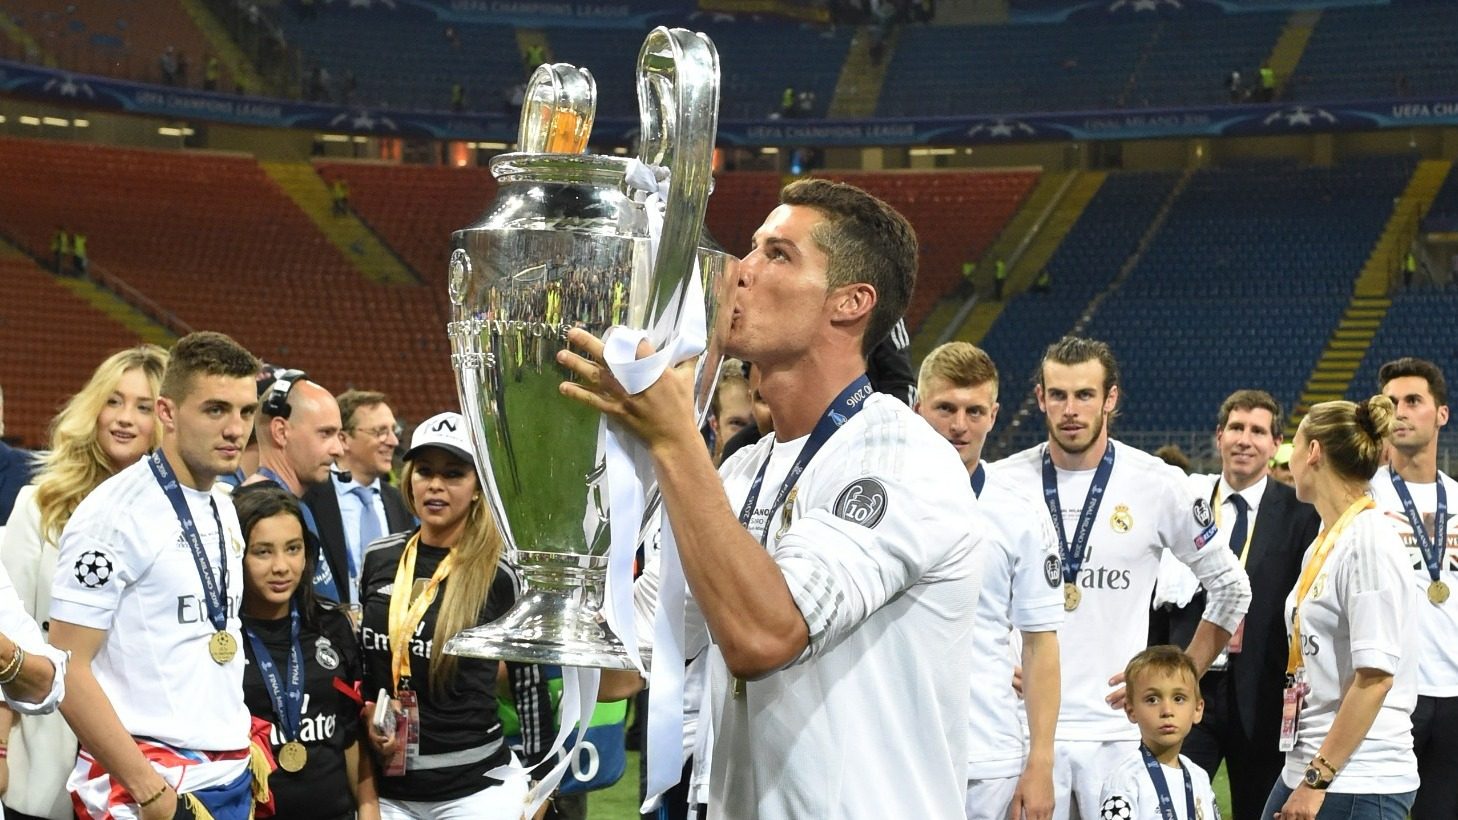 Listed: Every Champions League winner & the teams that have won the trophy  the most times in history